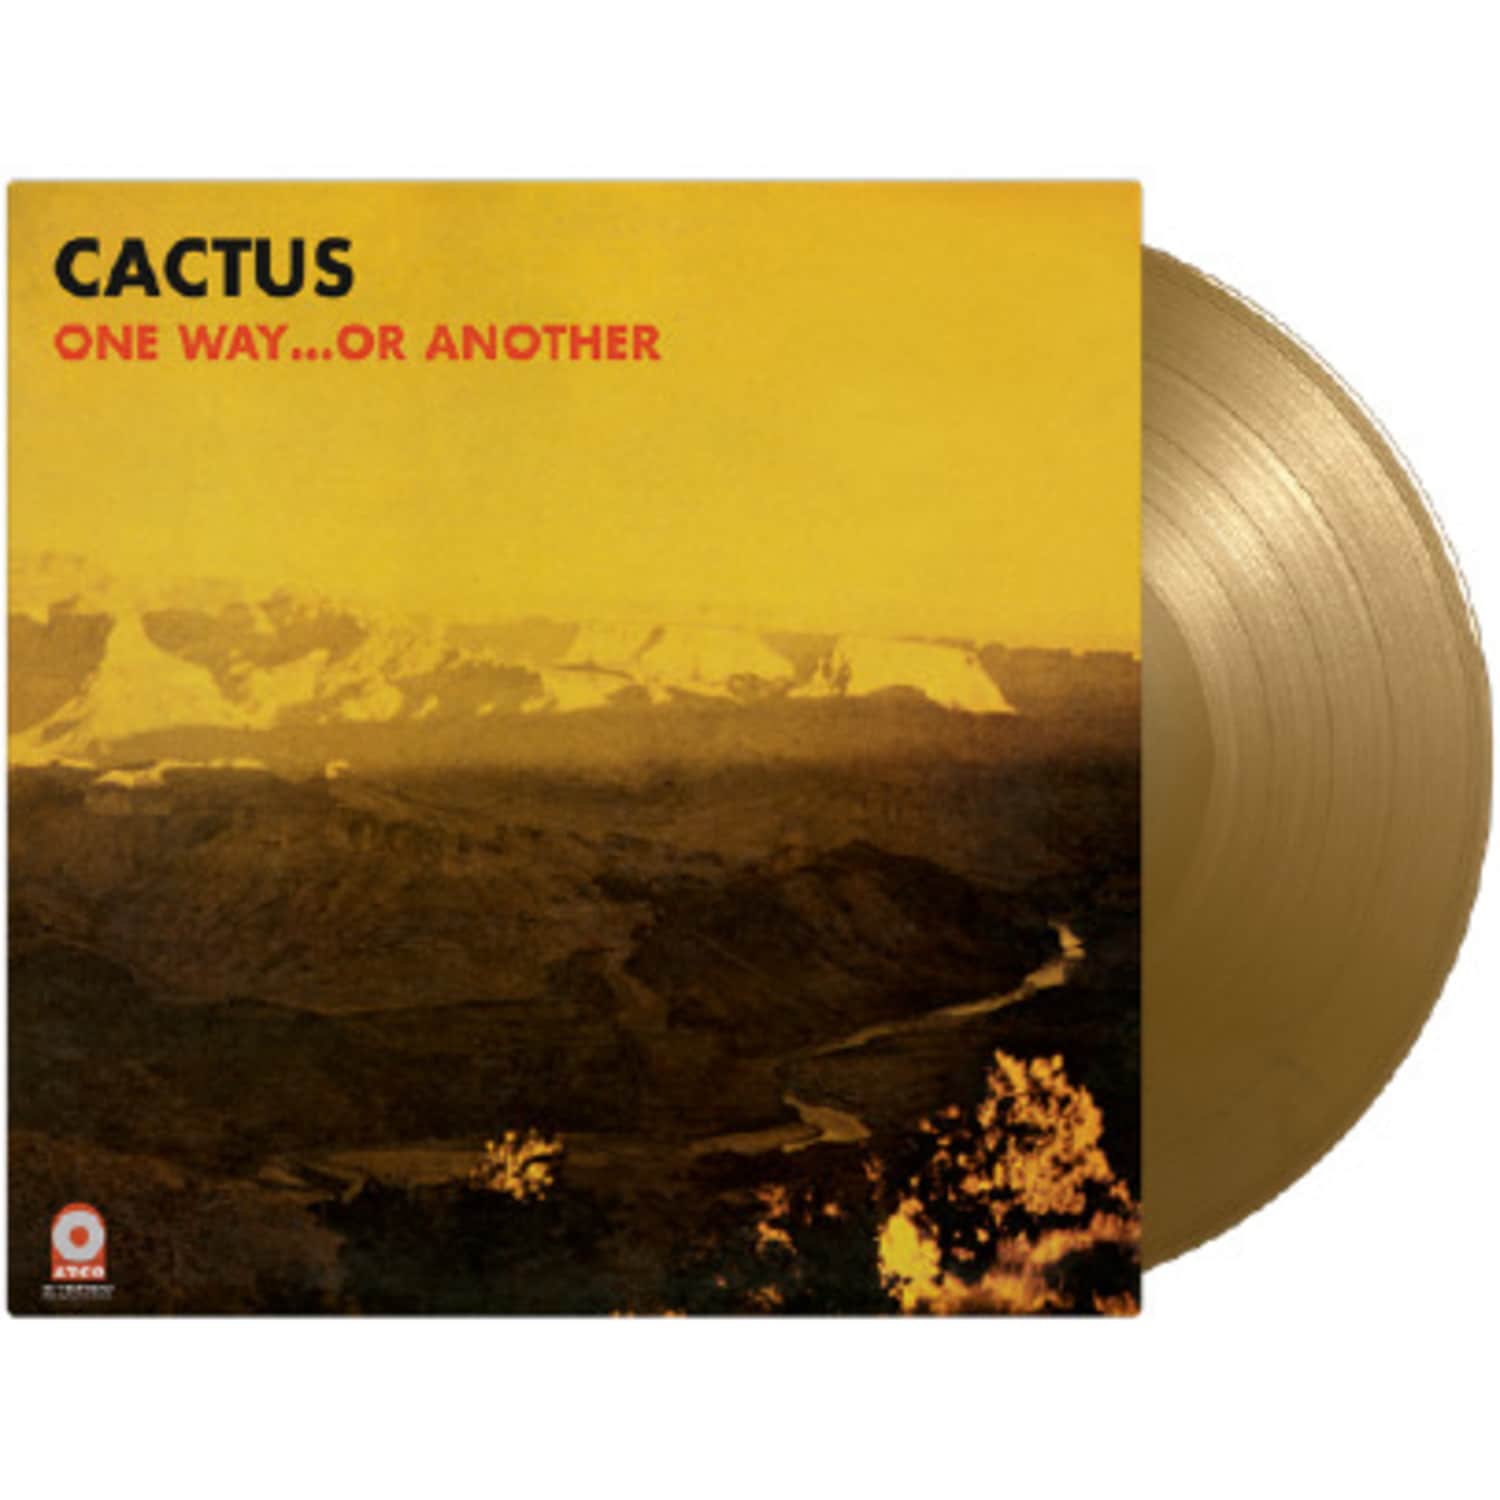 Cactus - ONE WAY...OR ANOTHER 